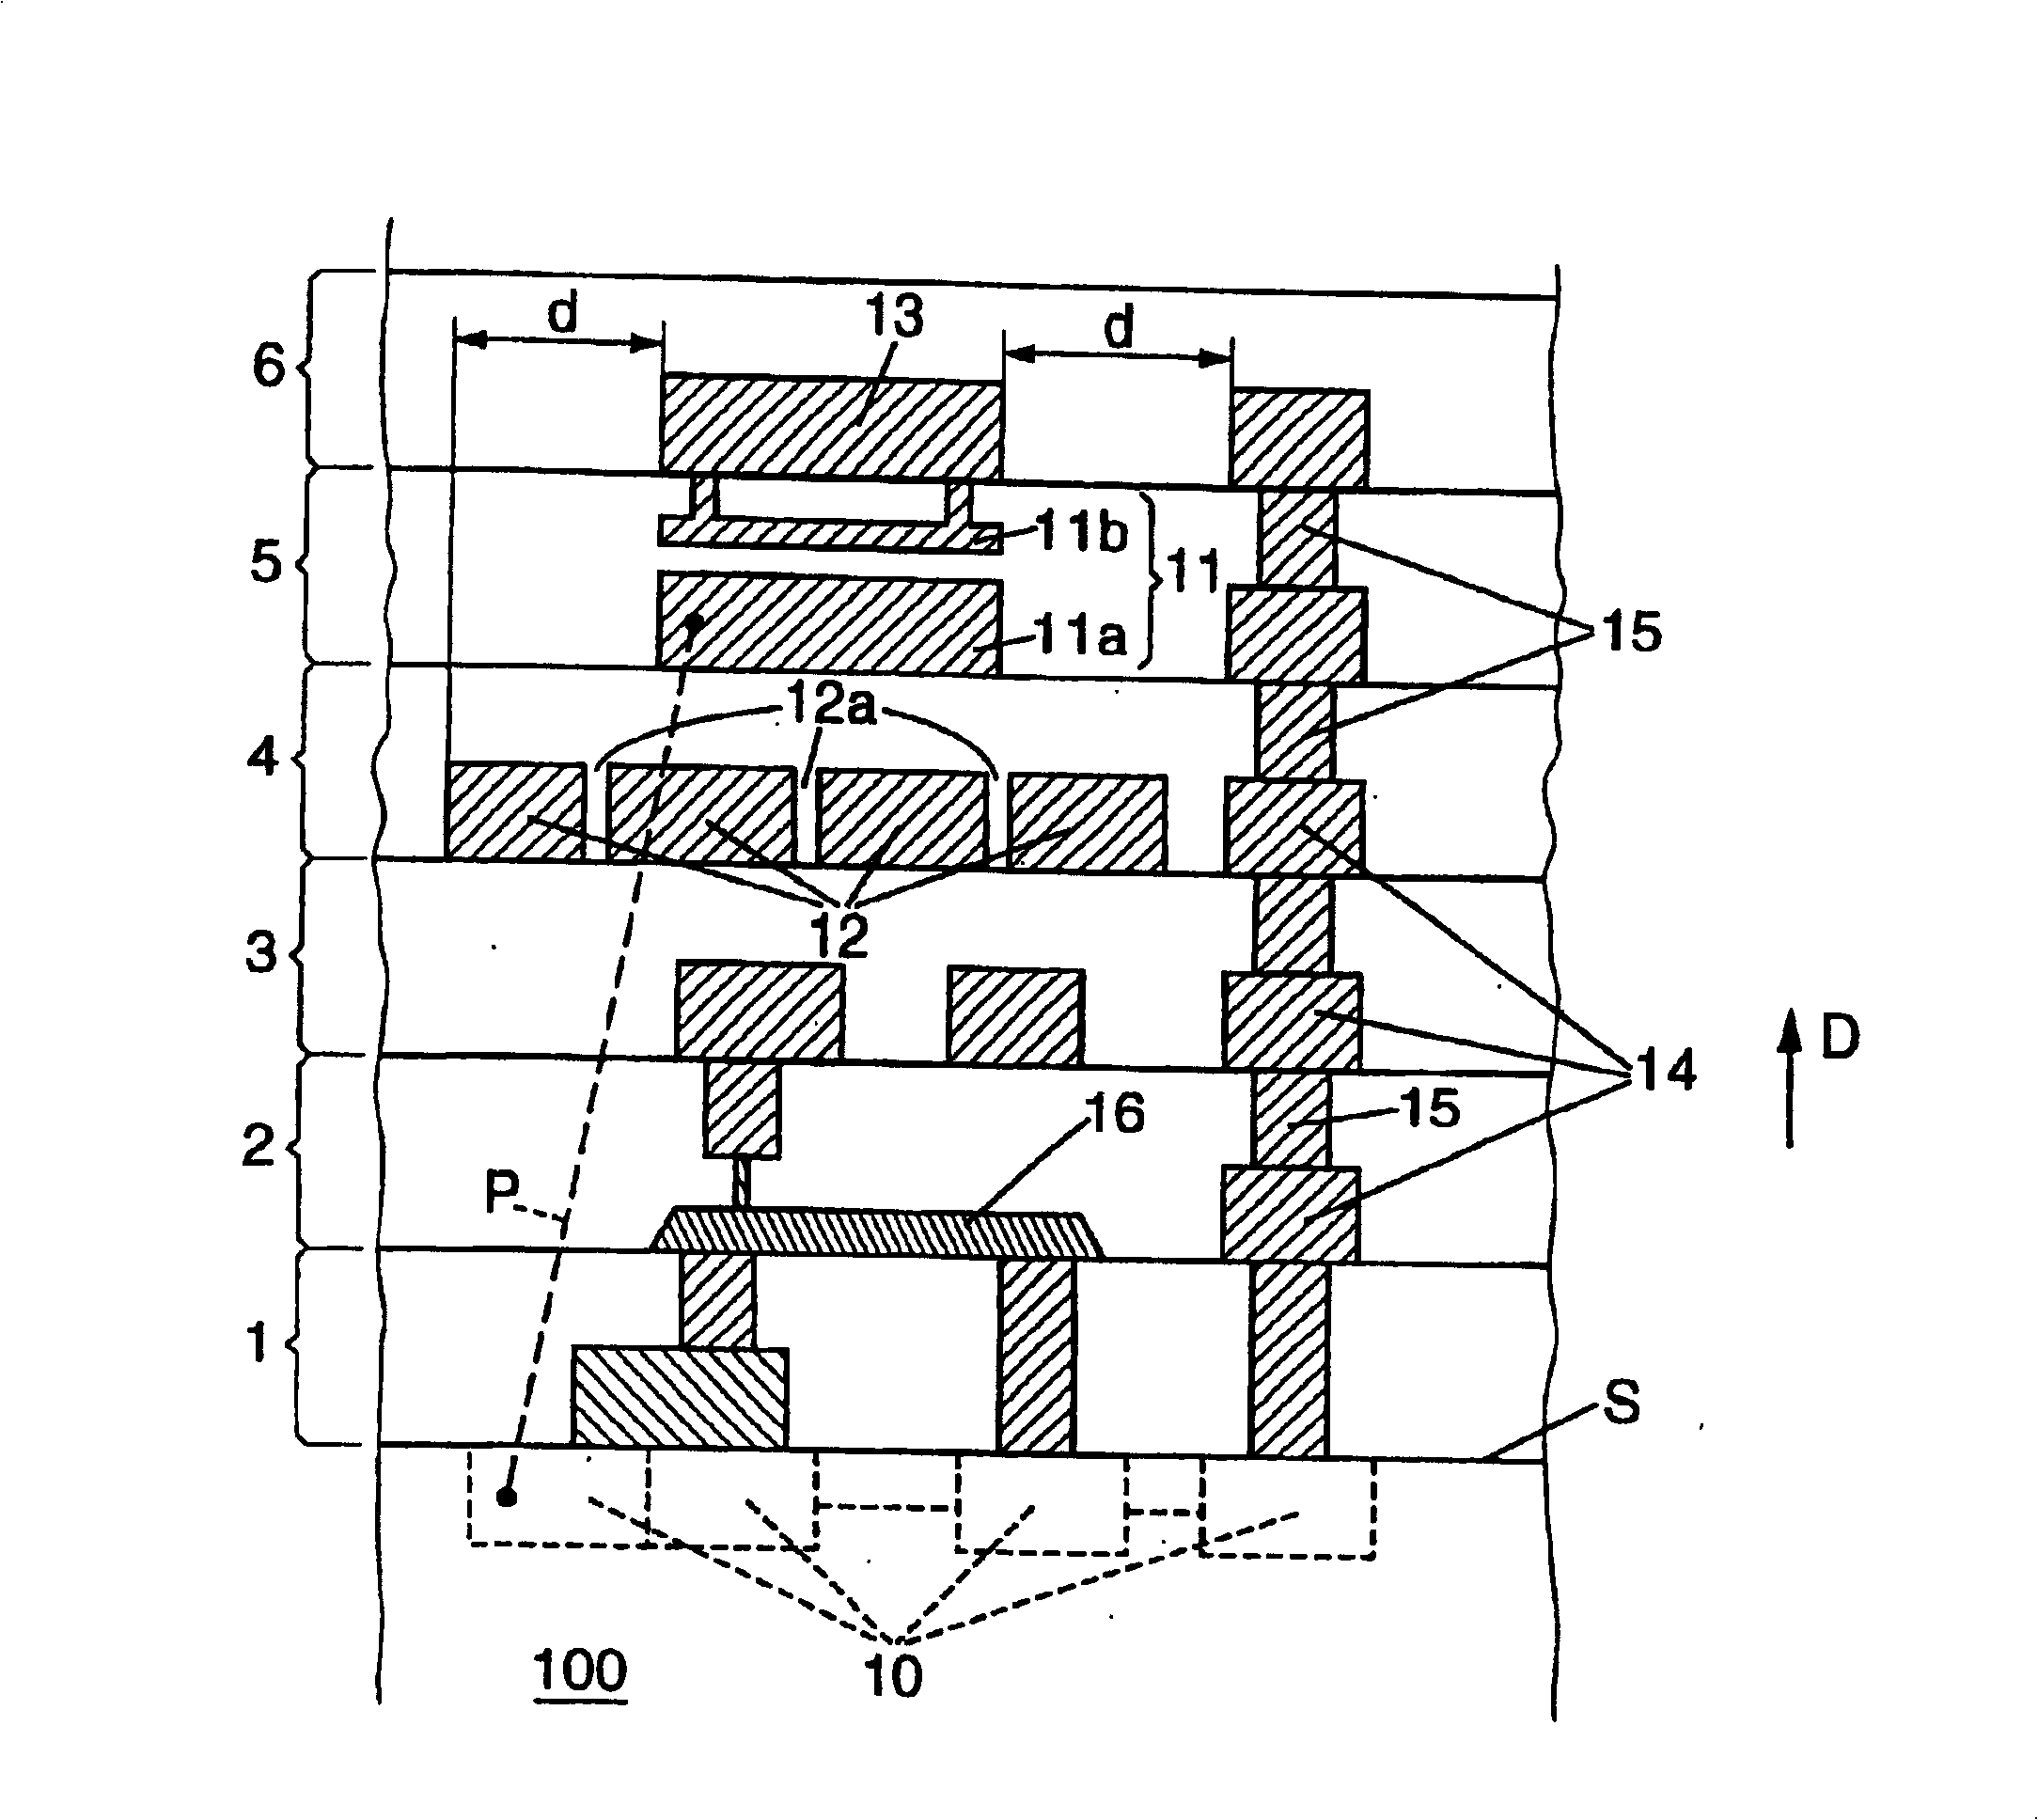 Circuit comprising a capacitor and at least one semiconductor component, and method for designing same